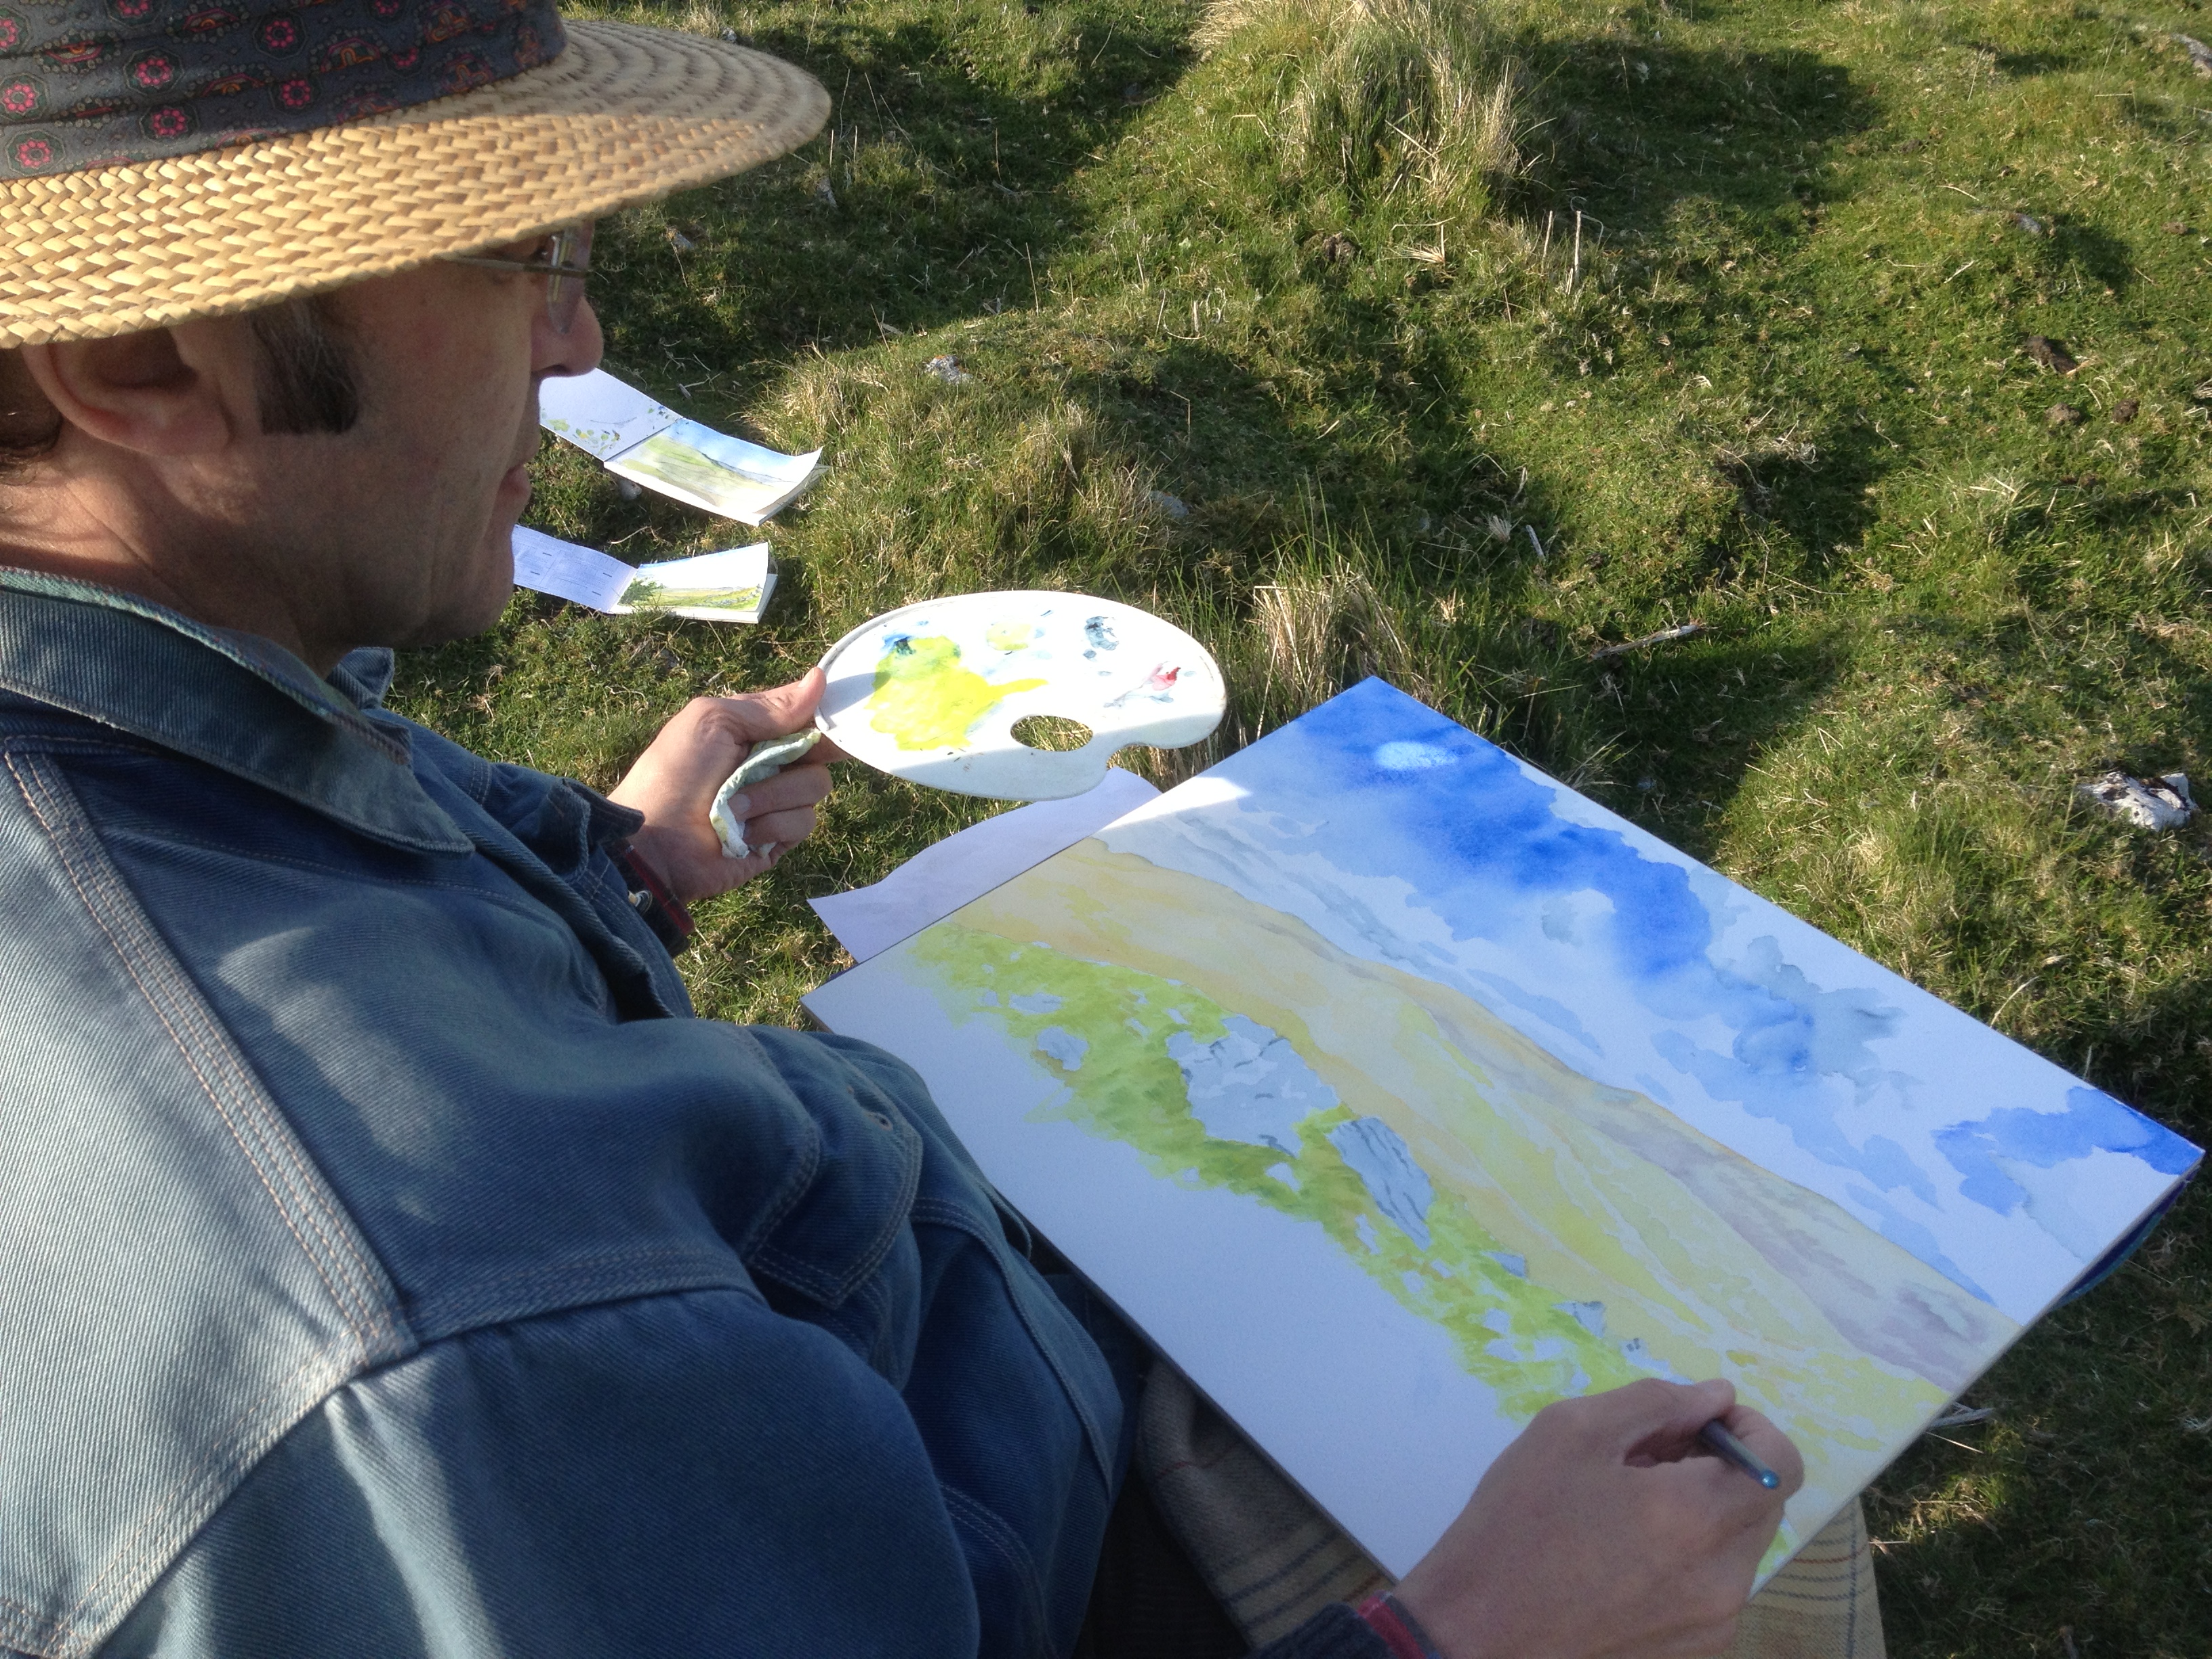 Ceri Thomas painting on location in south Wales (2014)